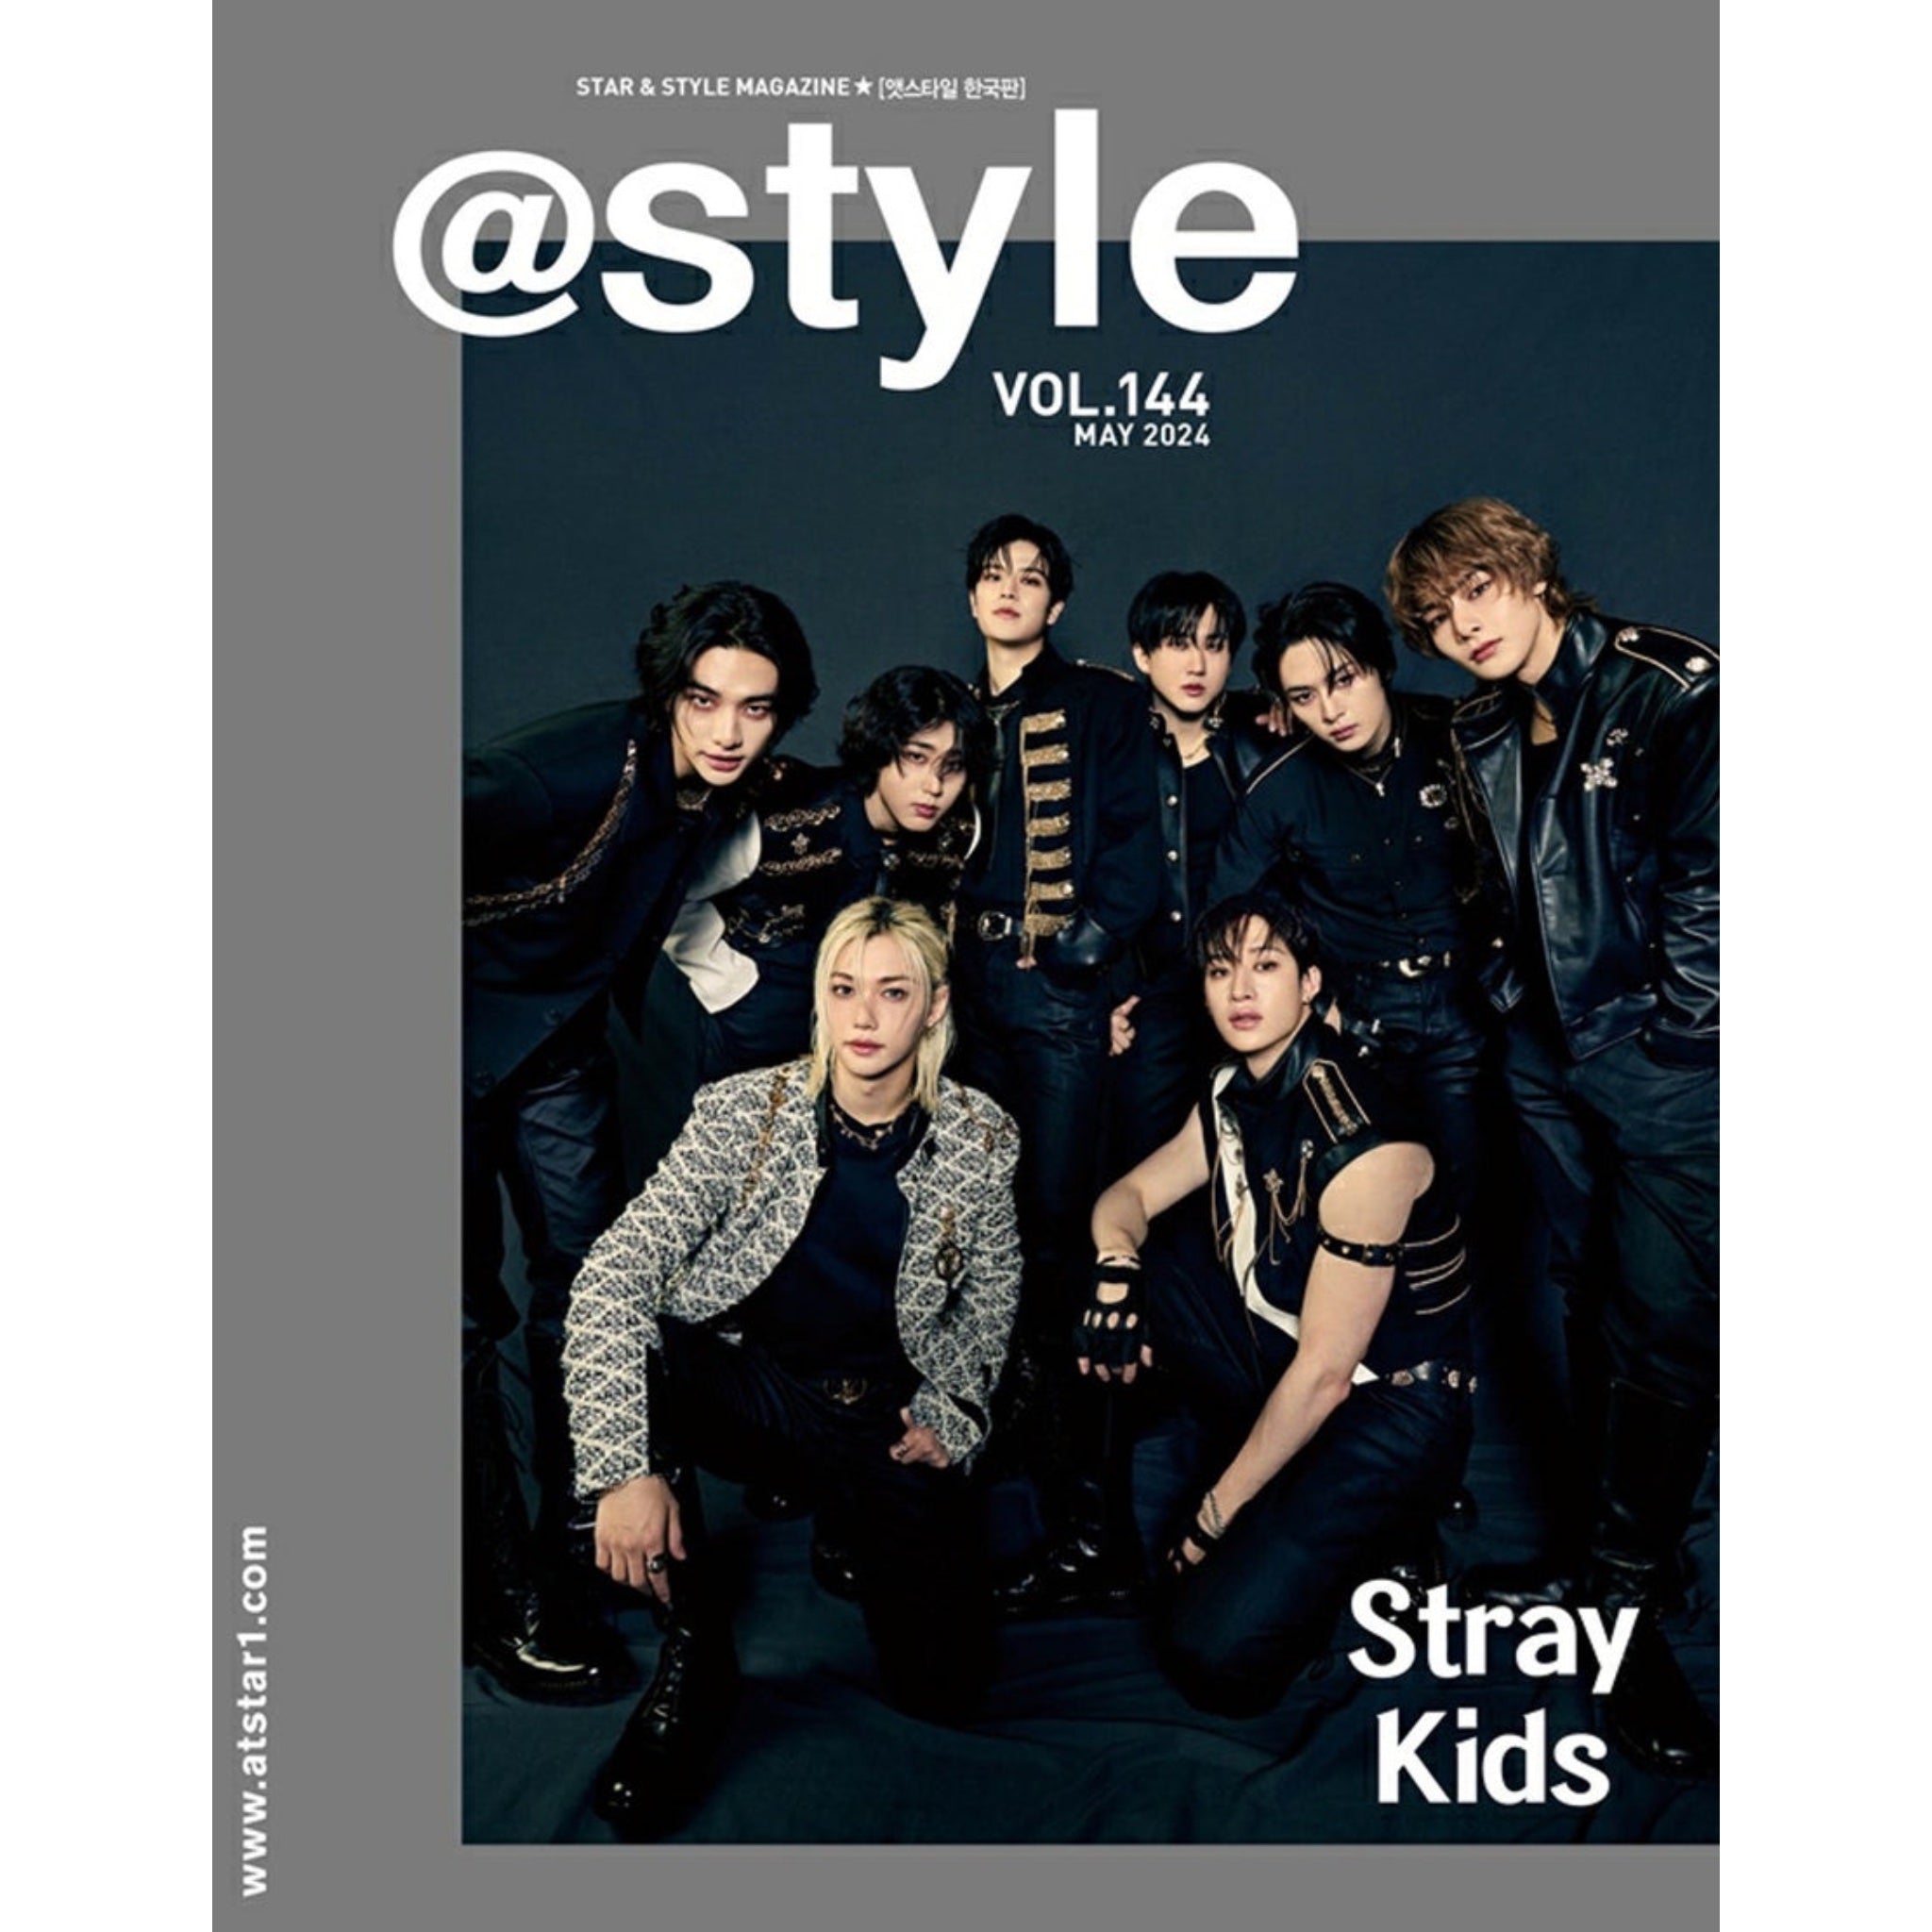 STRAY KIDS - @STYLE COVER MAY 2024